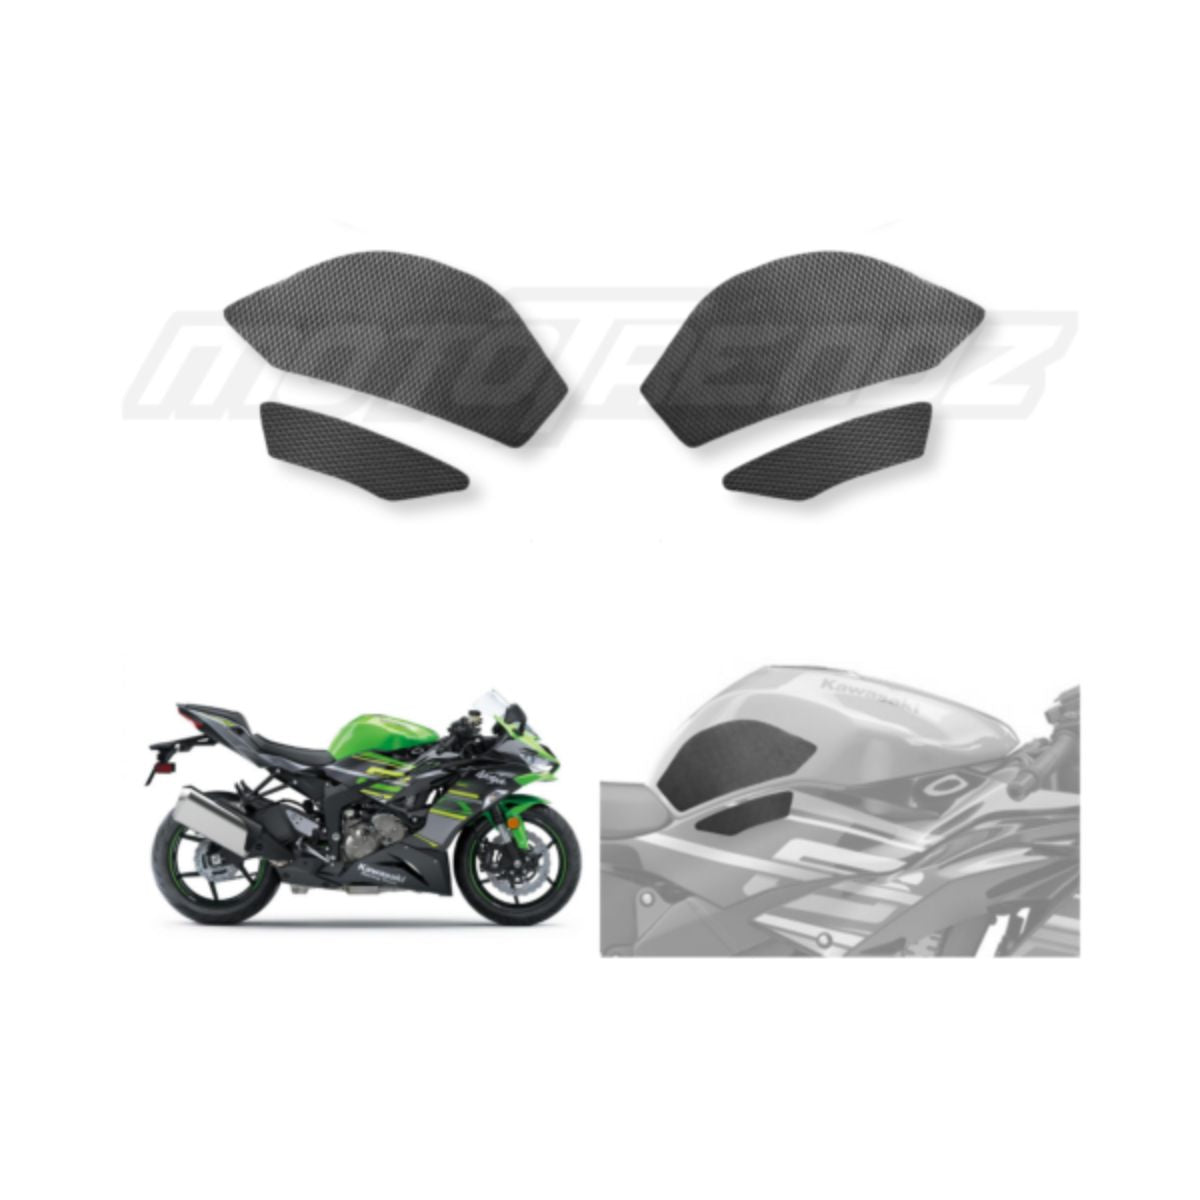 Traction Pads for Kawasaki ZX 6 R 3